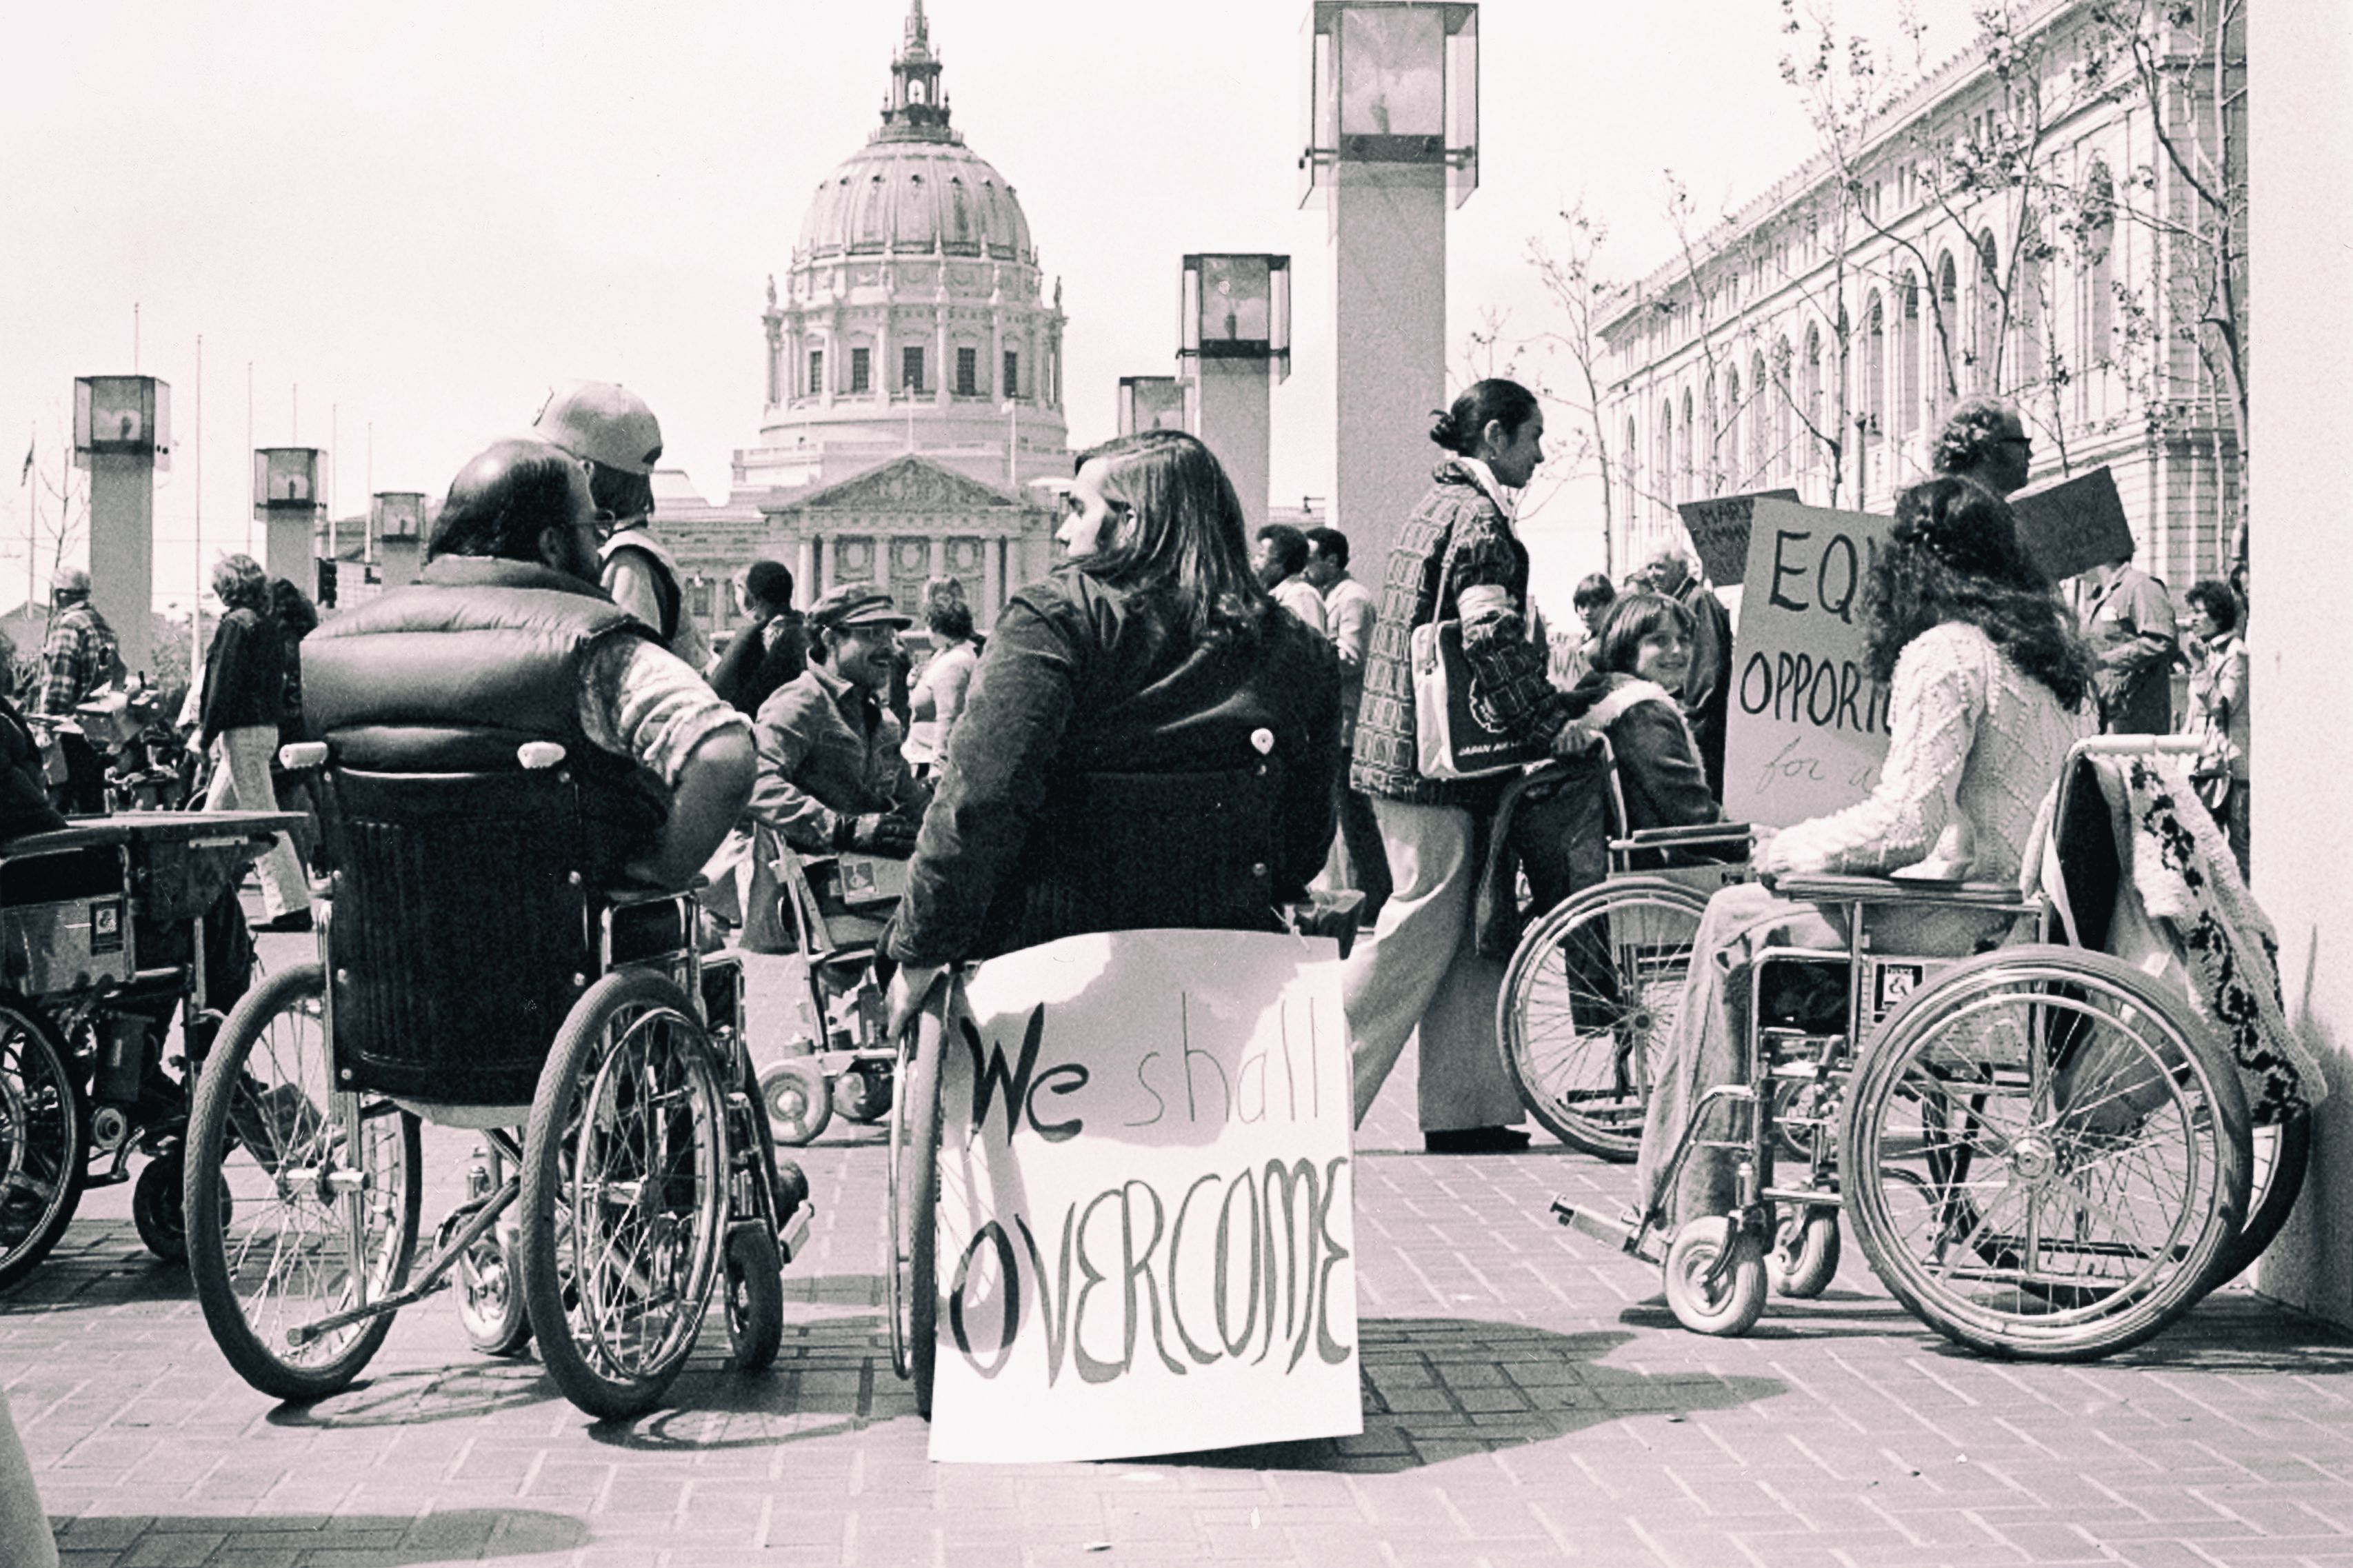 Protestors in wheelchairs with protest signs